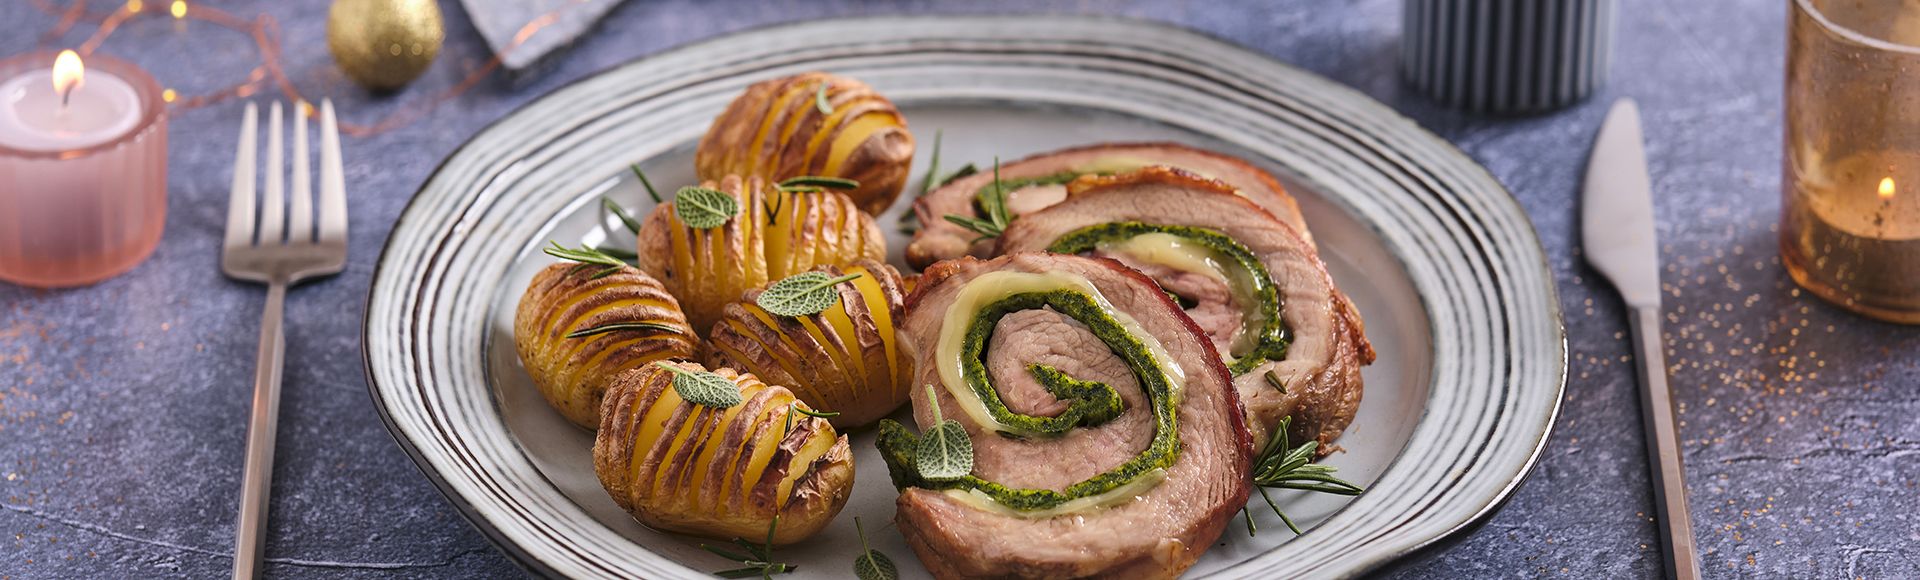 Stuffed veal roll and hasselback potatoes